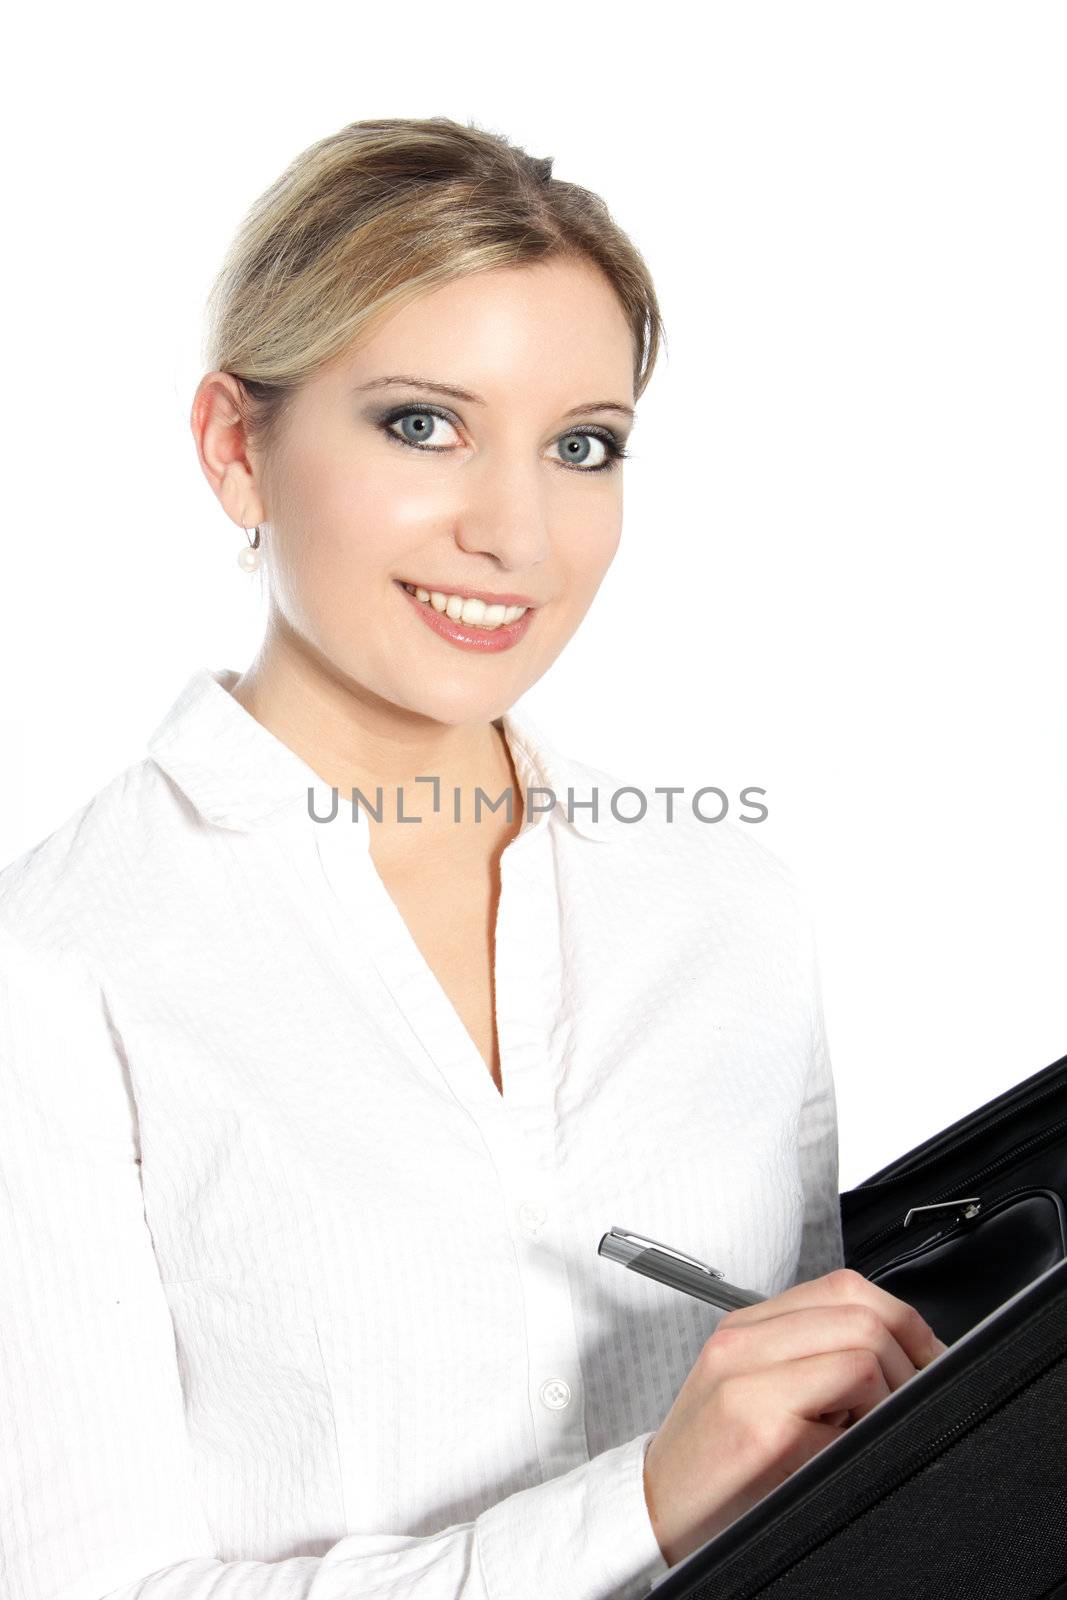 Beautiful young woman writing in a file which she is holding in her hands, isolated on white